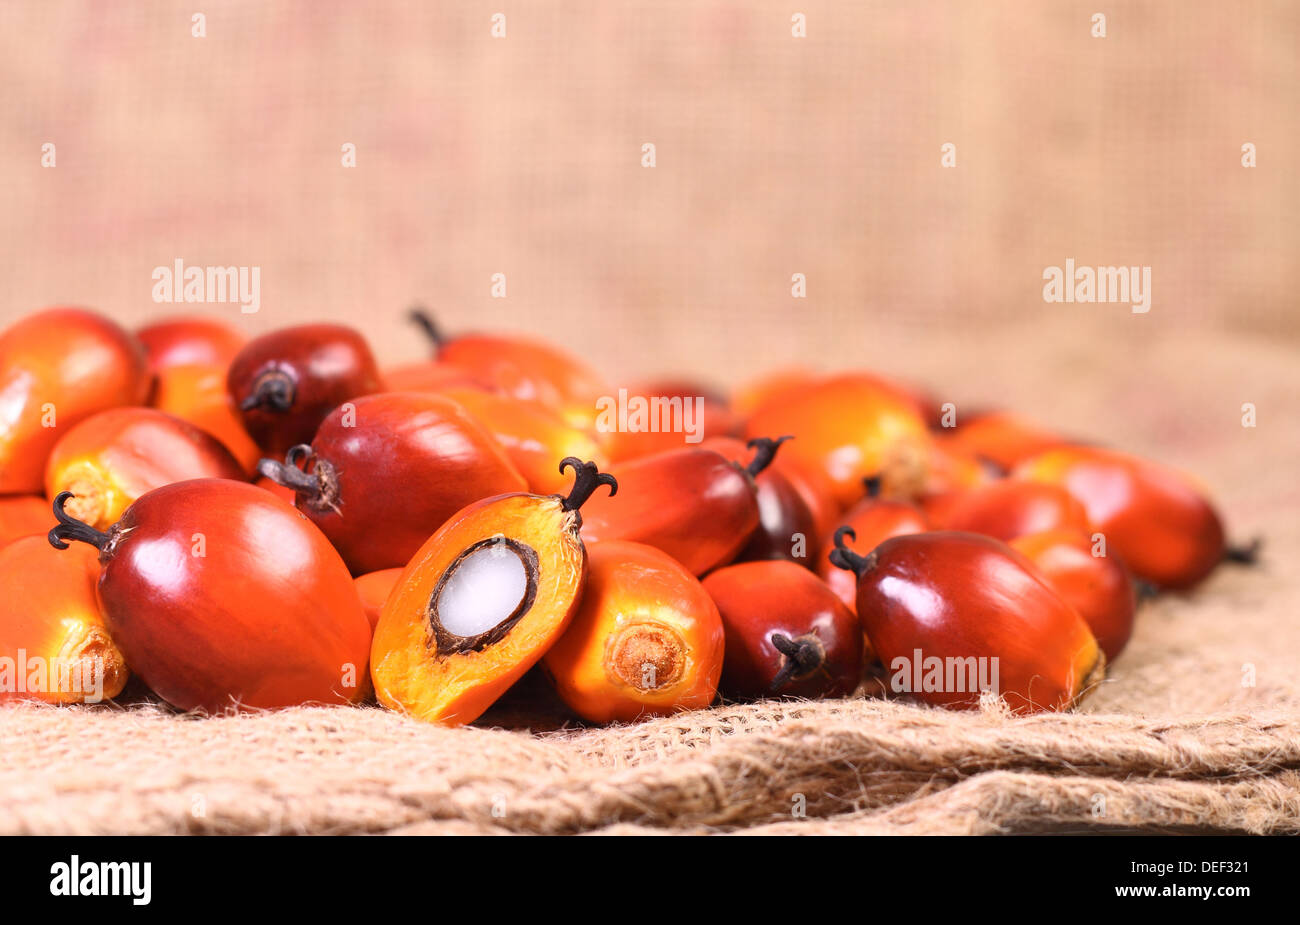 A group of oil palm fruits on the sack bag Stock Photo